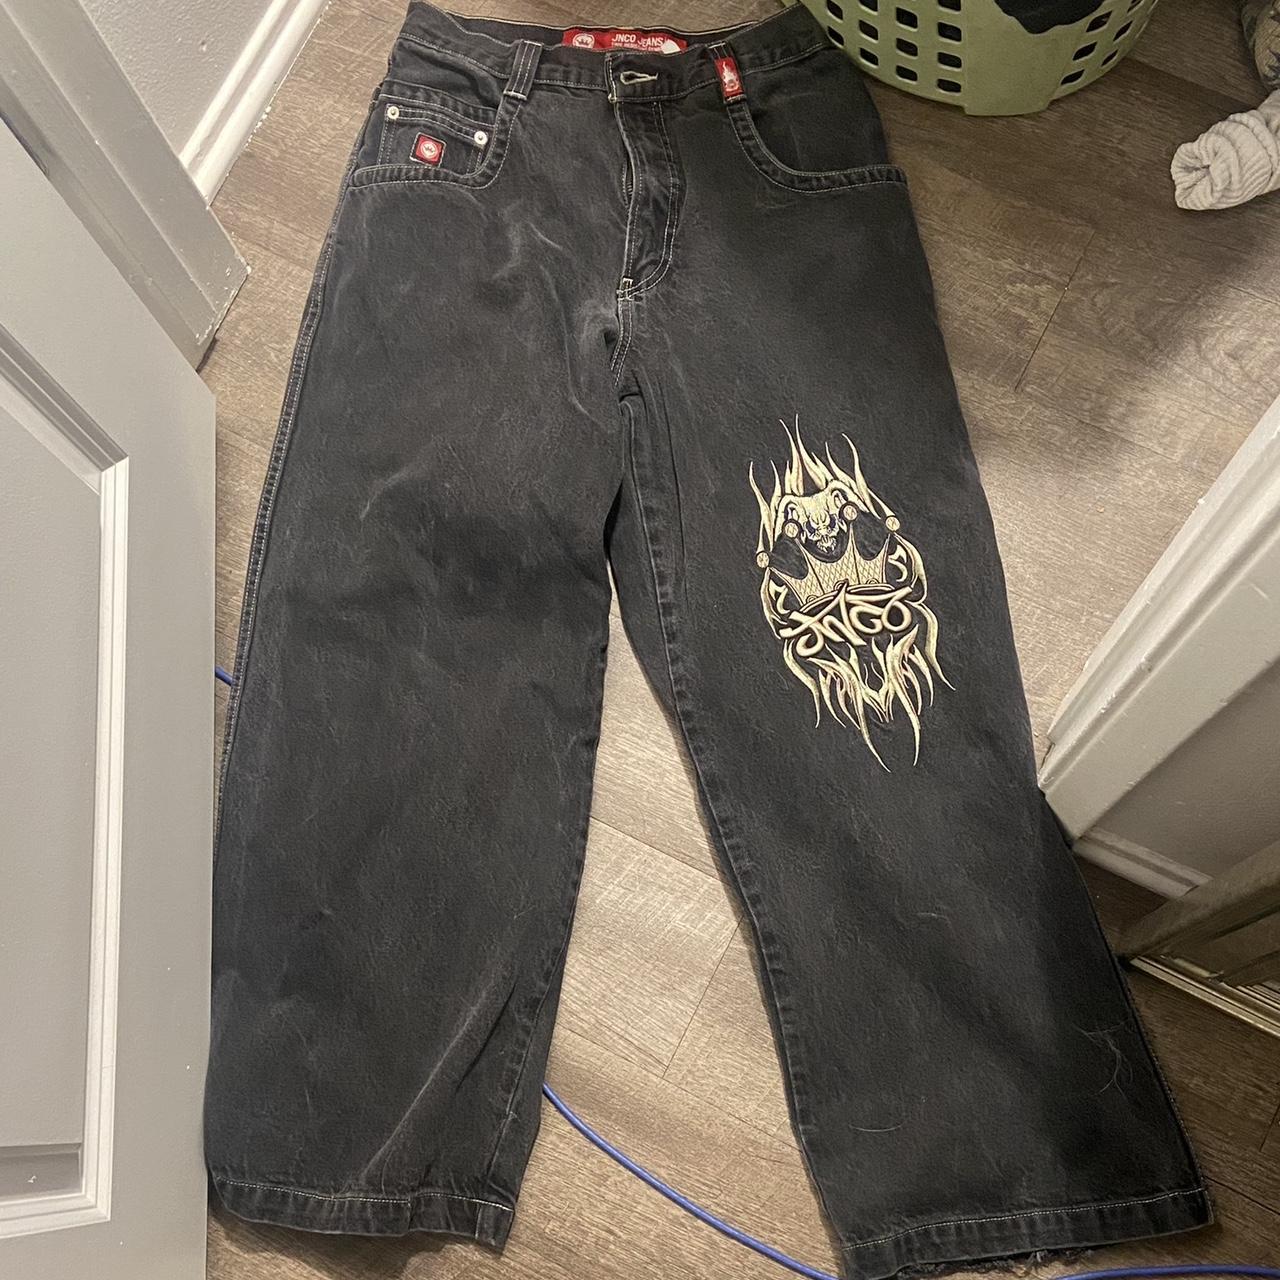 Jnco jeans snakebites in amazing condition size... - Depop